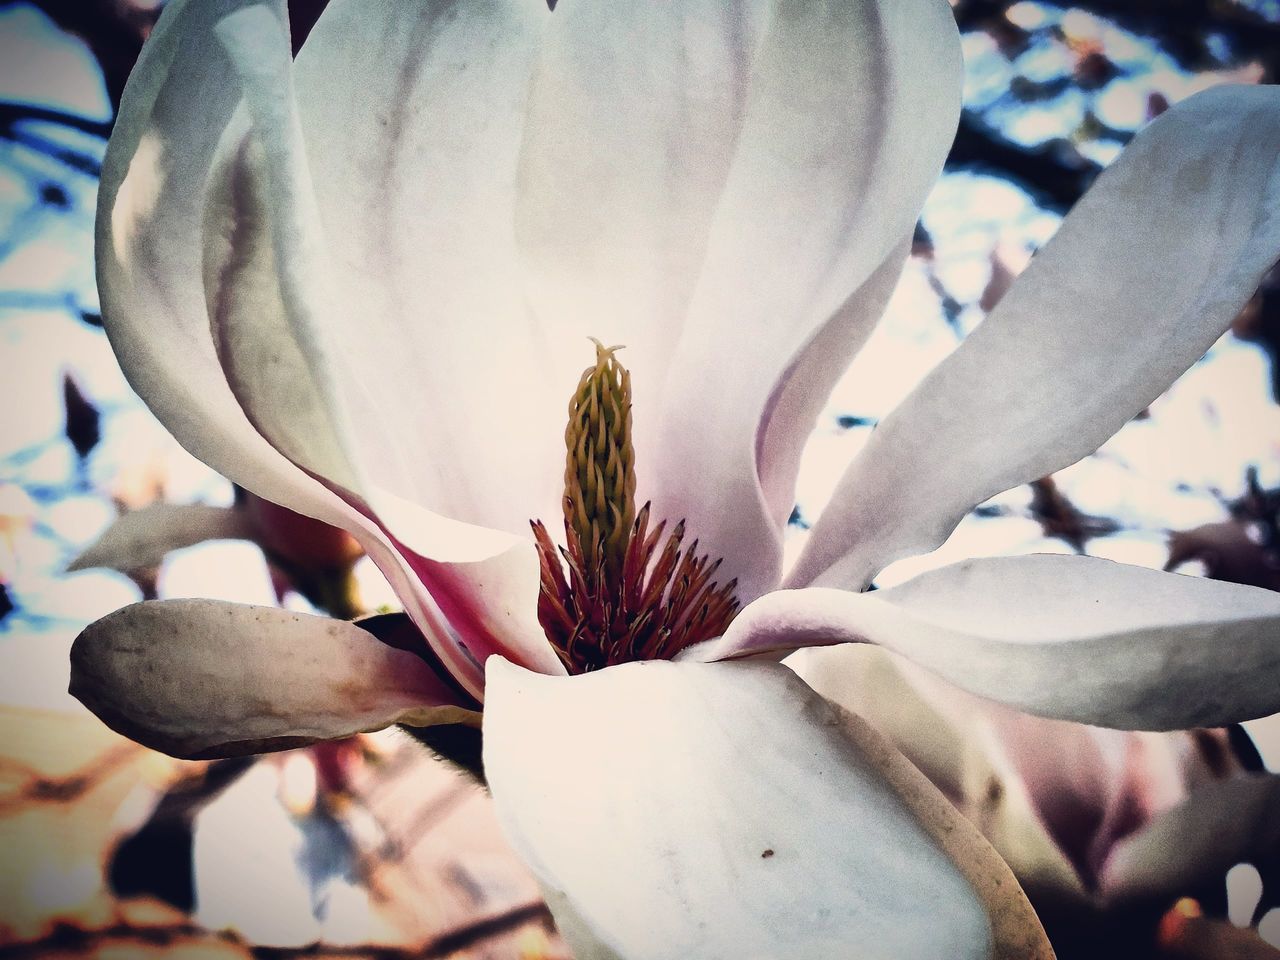 plant, flower, flowering plant, beauty in nature, growth, freshness, close-up, fragility, nature, petal, blossom, spring, magnolia, flower head, inflorescence, no people, macro photography, leaf, focus on foreground, pollen, day, botany, springtime, outdoors, white